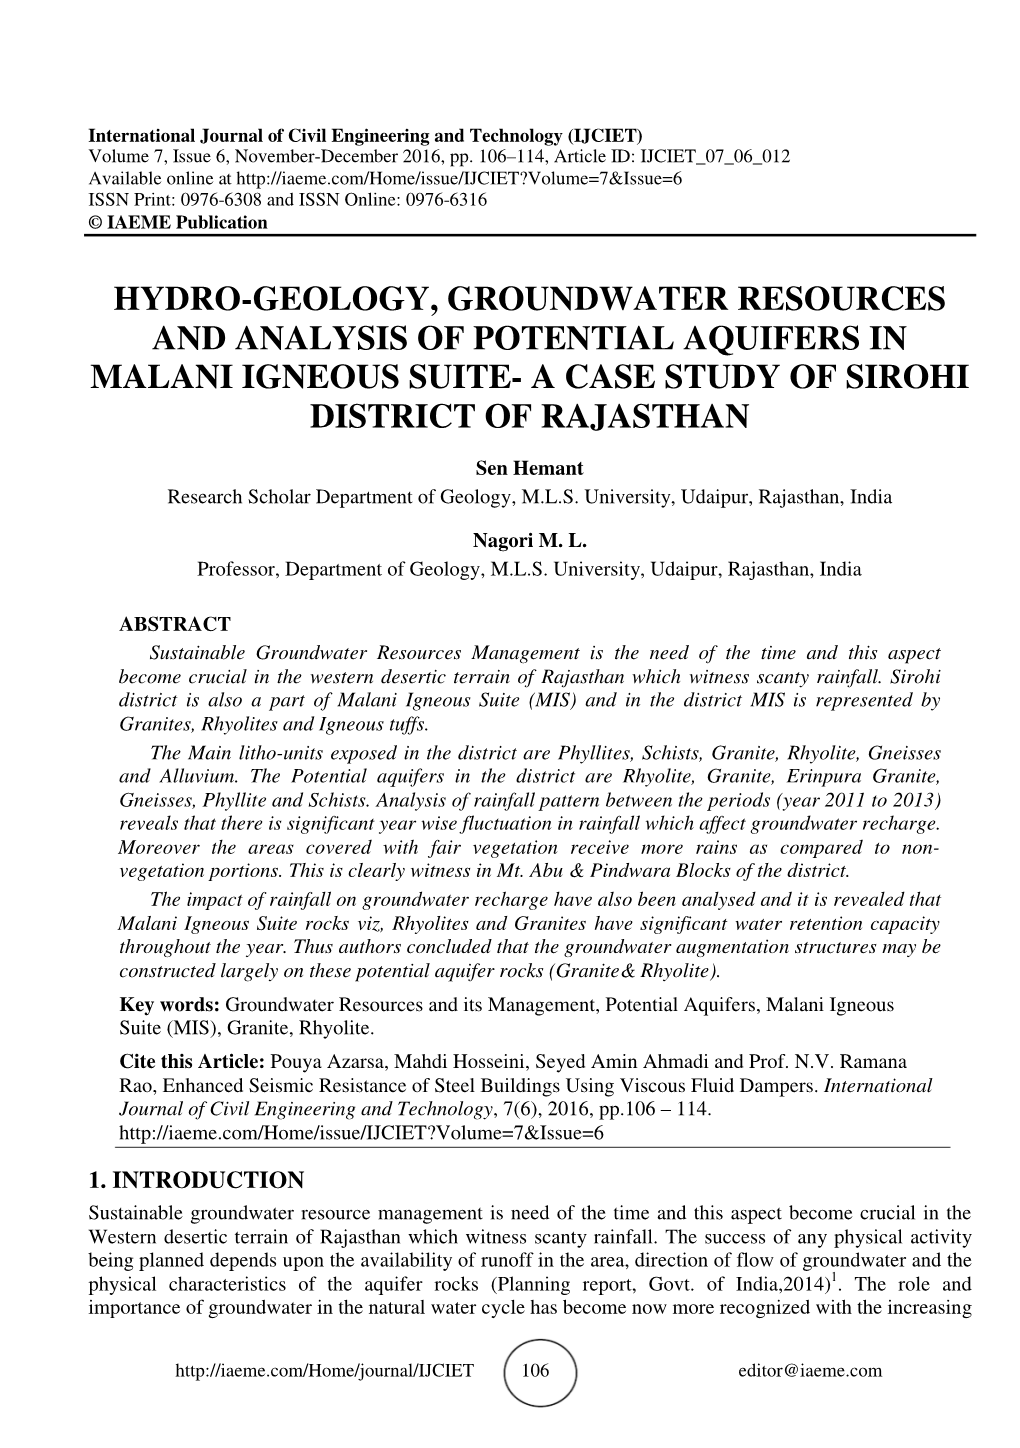 Hydro-Geology, Groundwater Resources and Analysis of Potential Aquifers in Malani Igneous Suite- a Case Study of Sirohi District of Rajasthan